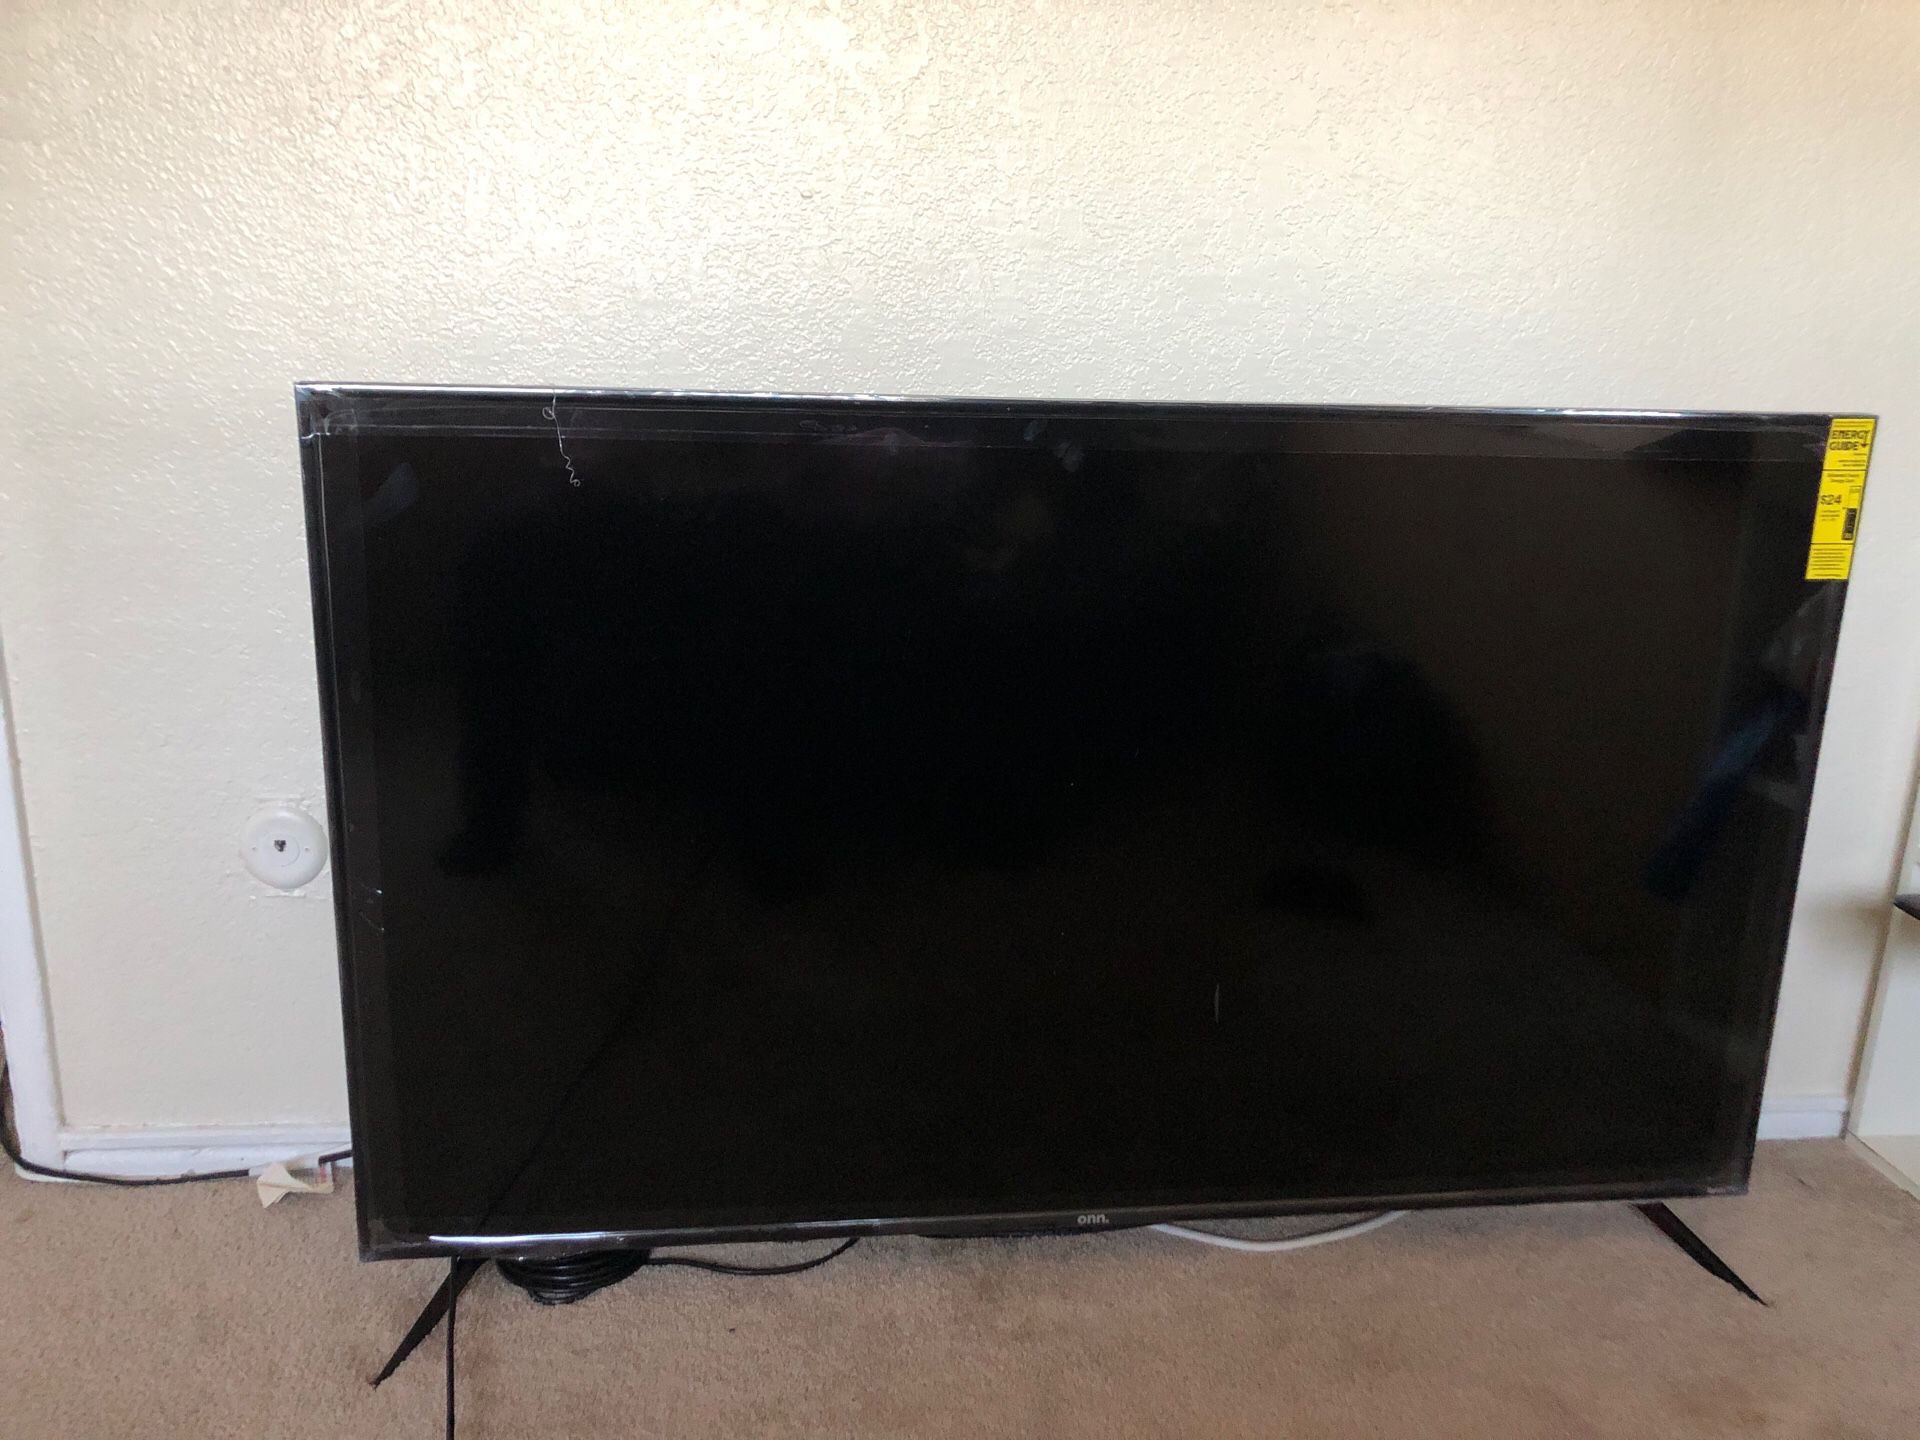 ONN TV 58 inches. Cracked screen. I’m selling it for 50 dollars. Anyone that could fix it that would be great.